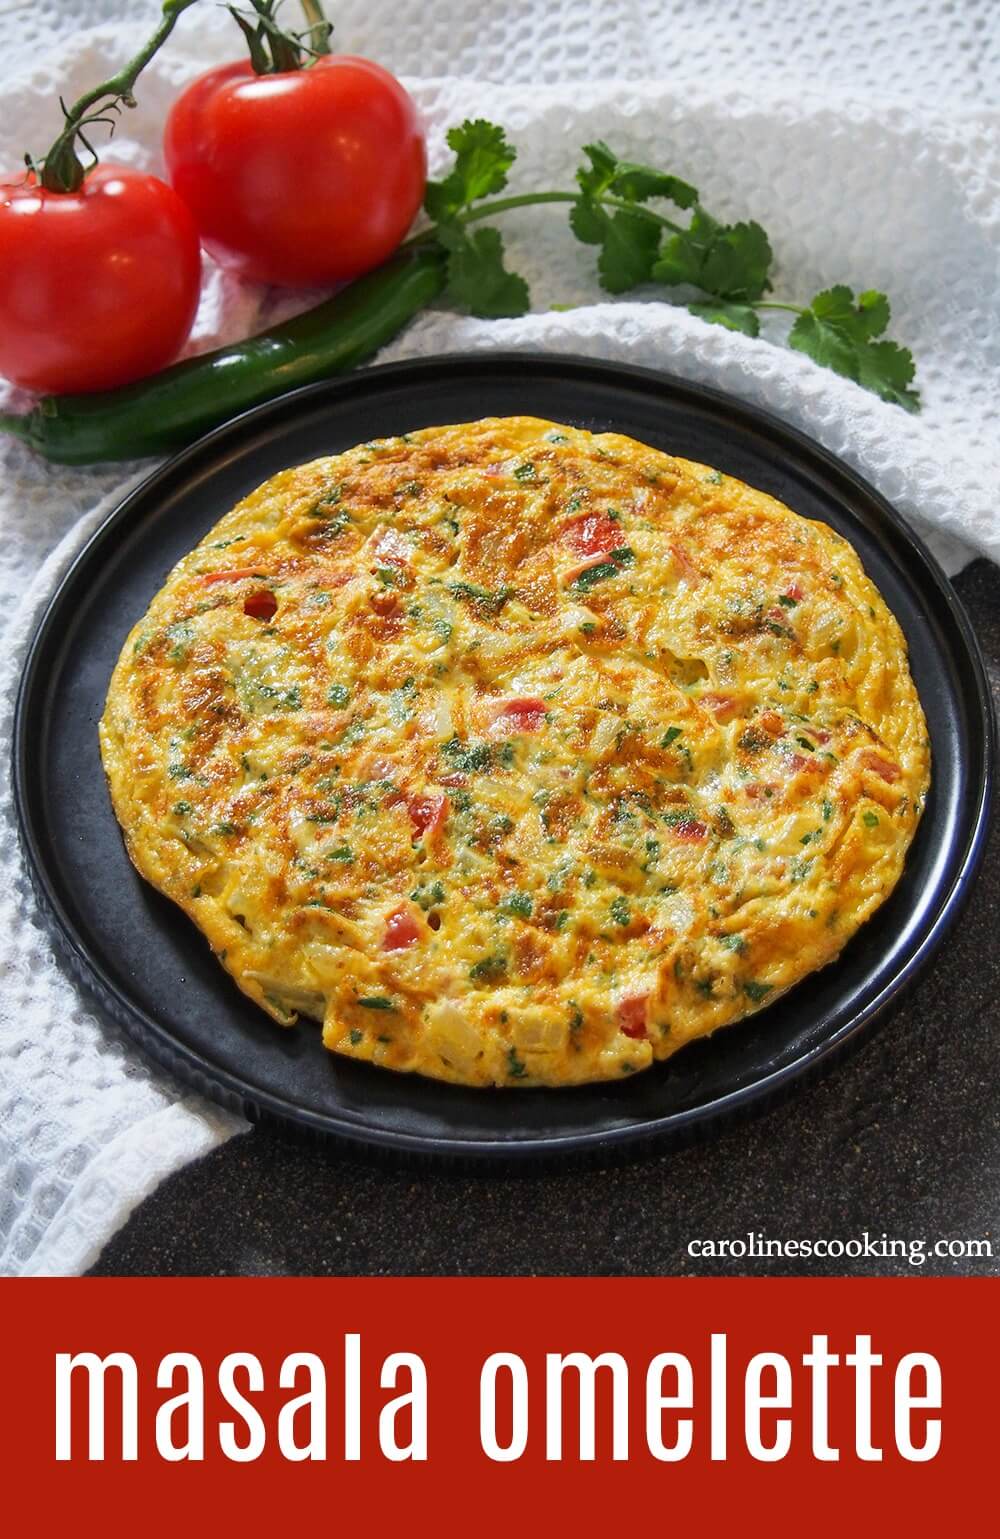 Masala omelet is a popular Indian breakfast packed with flavor.  It's quick and easy to make, with a simple combination of vegetables and a bit of spice.  Enjoy it as it is or wrapped in a roti.  #eggs #omelet #indianfood